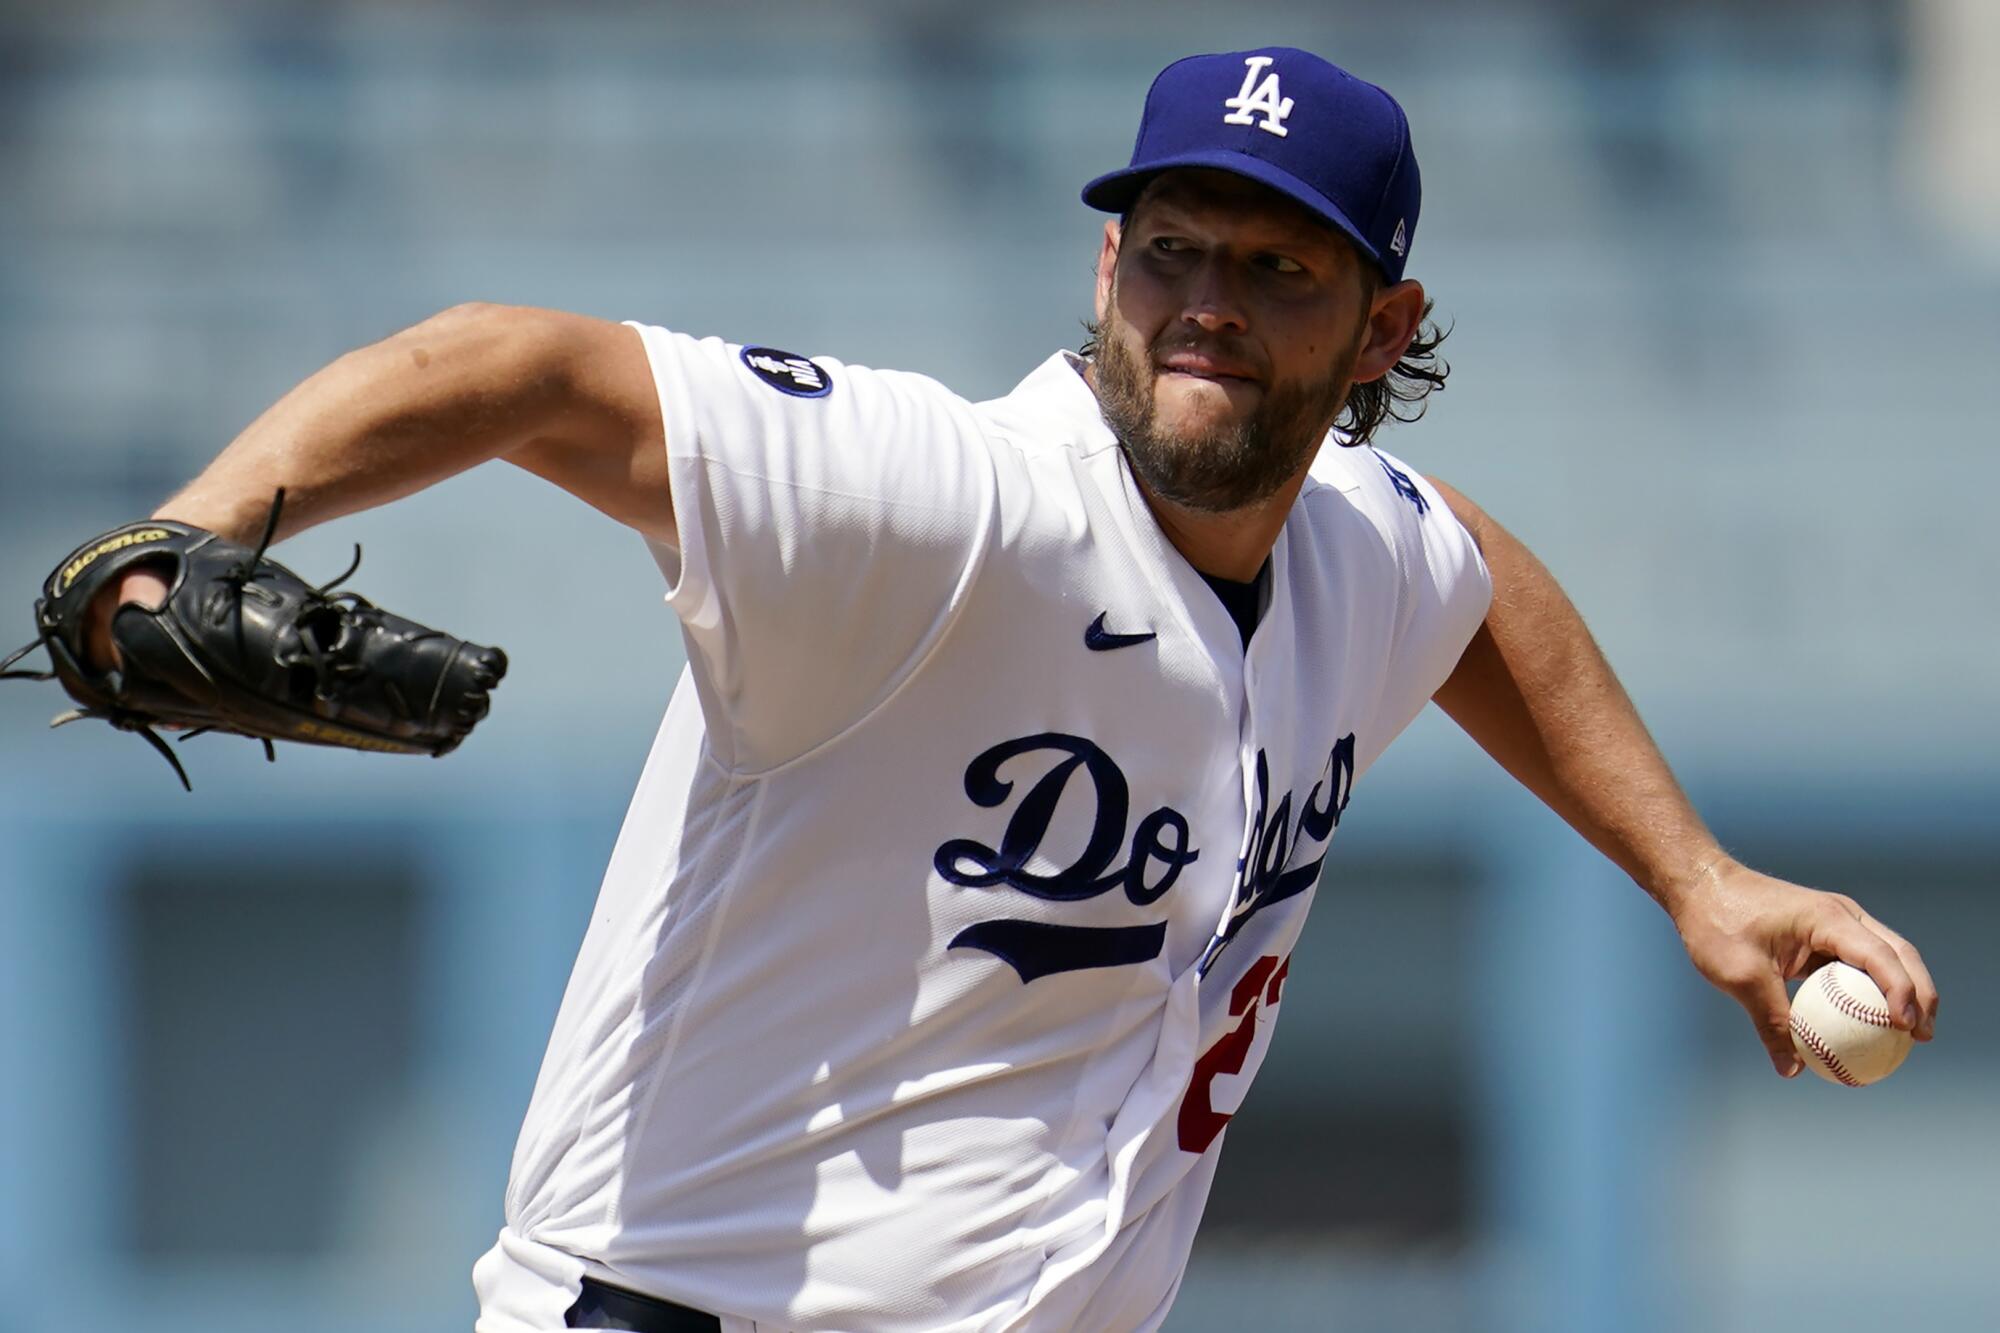 Dodgers starting pitcher Clayton Kershaw delivers during a game.